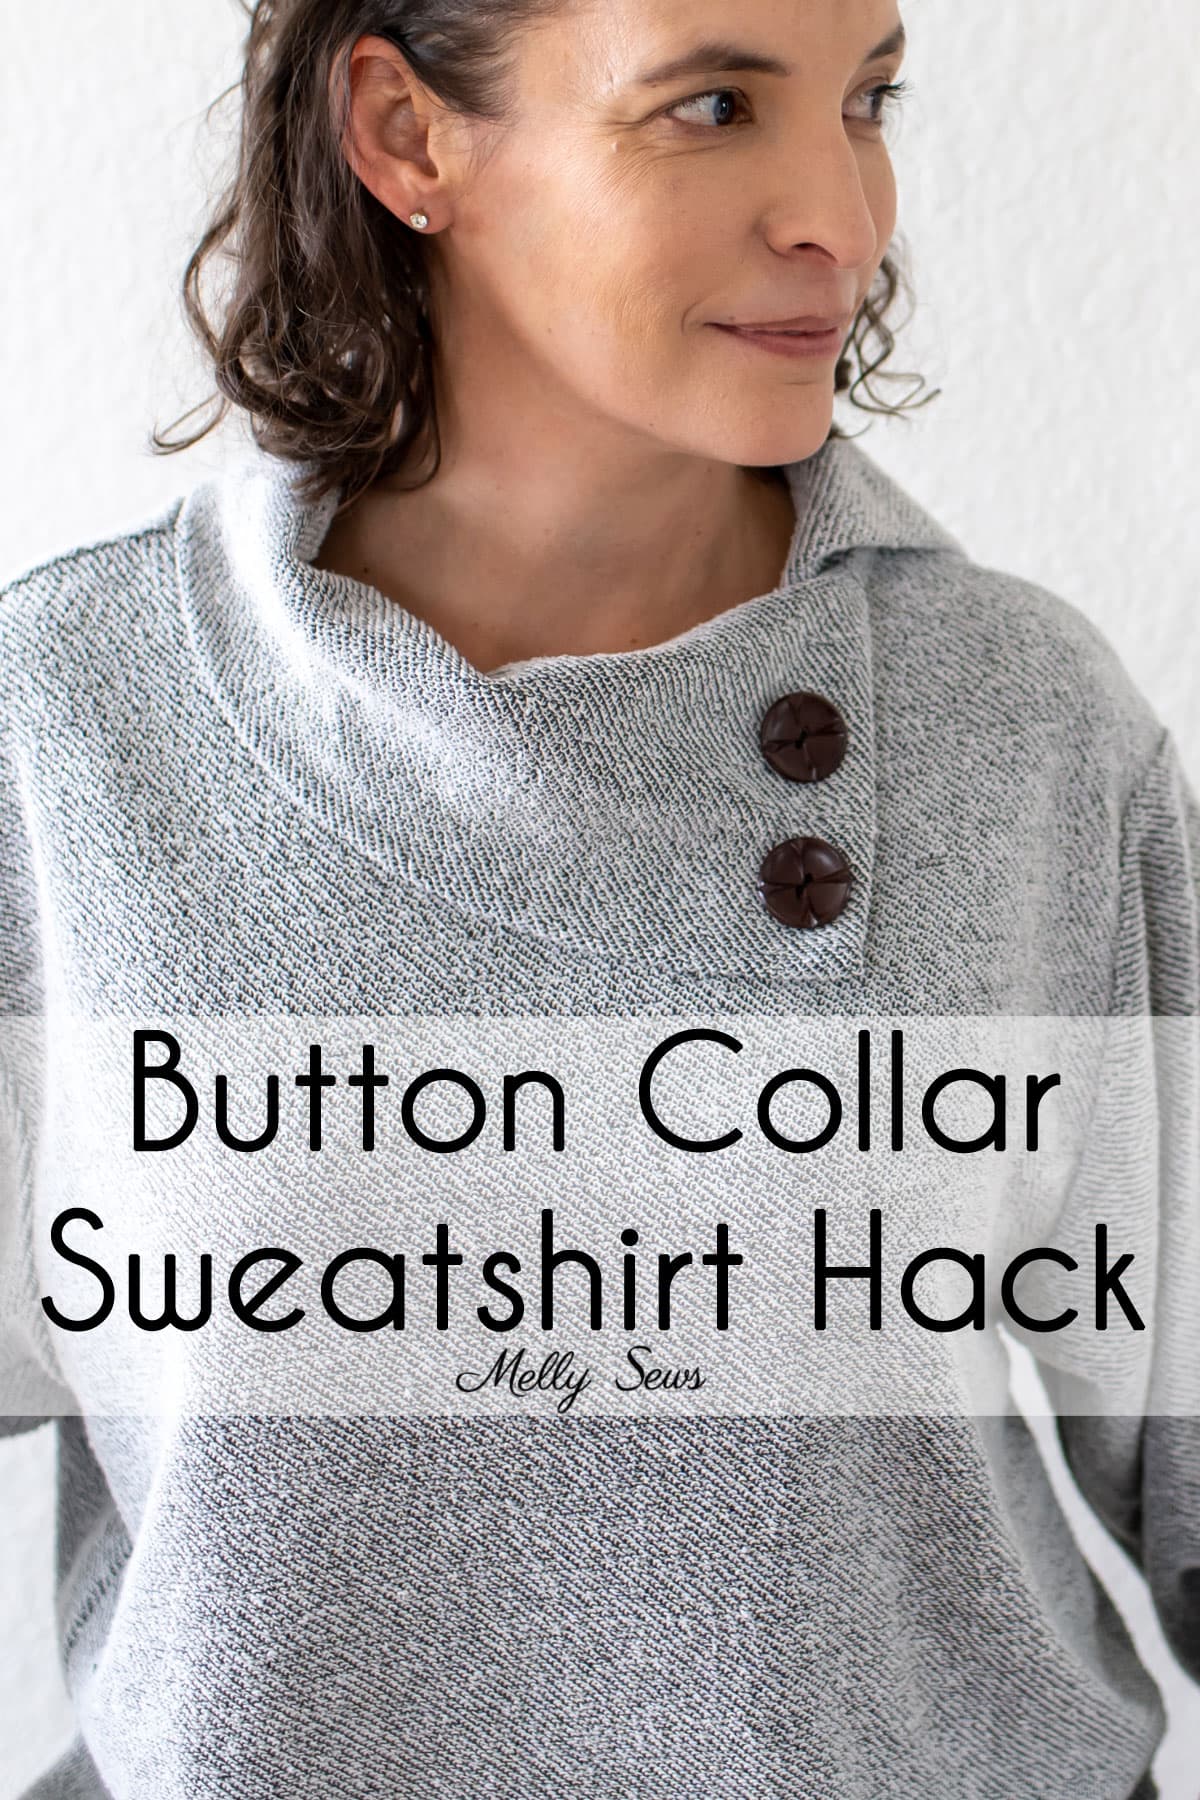 My Best Tips for Sewing Sweater Knit Fabrics - Melly Sews